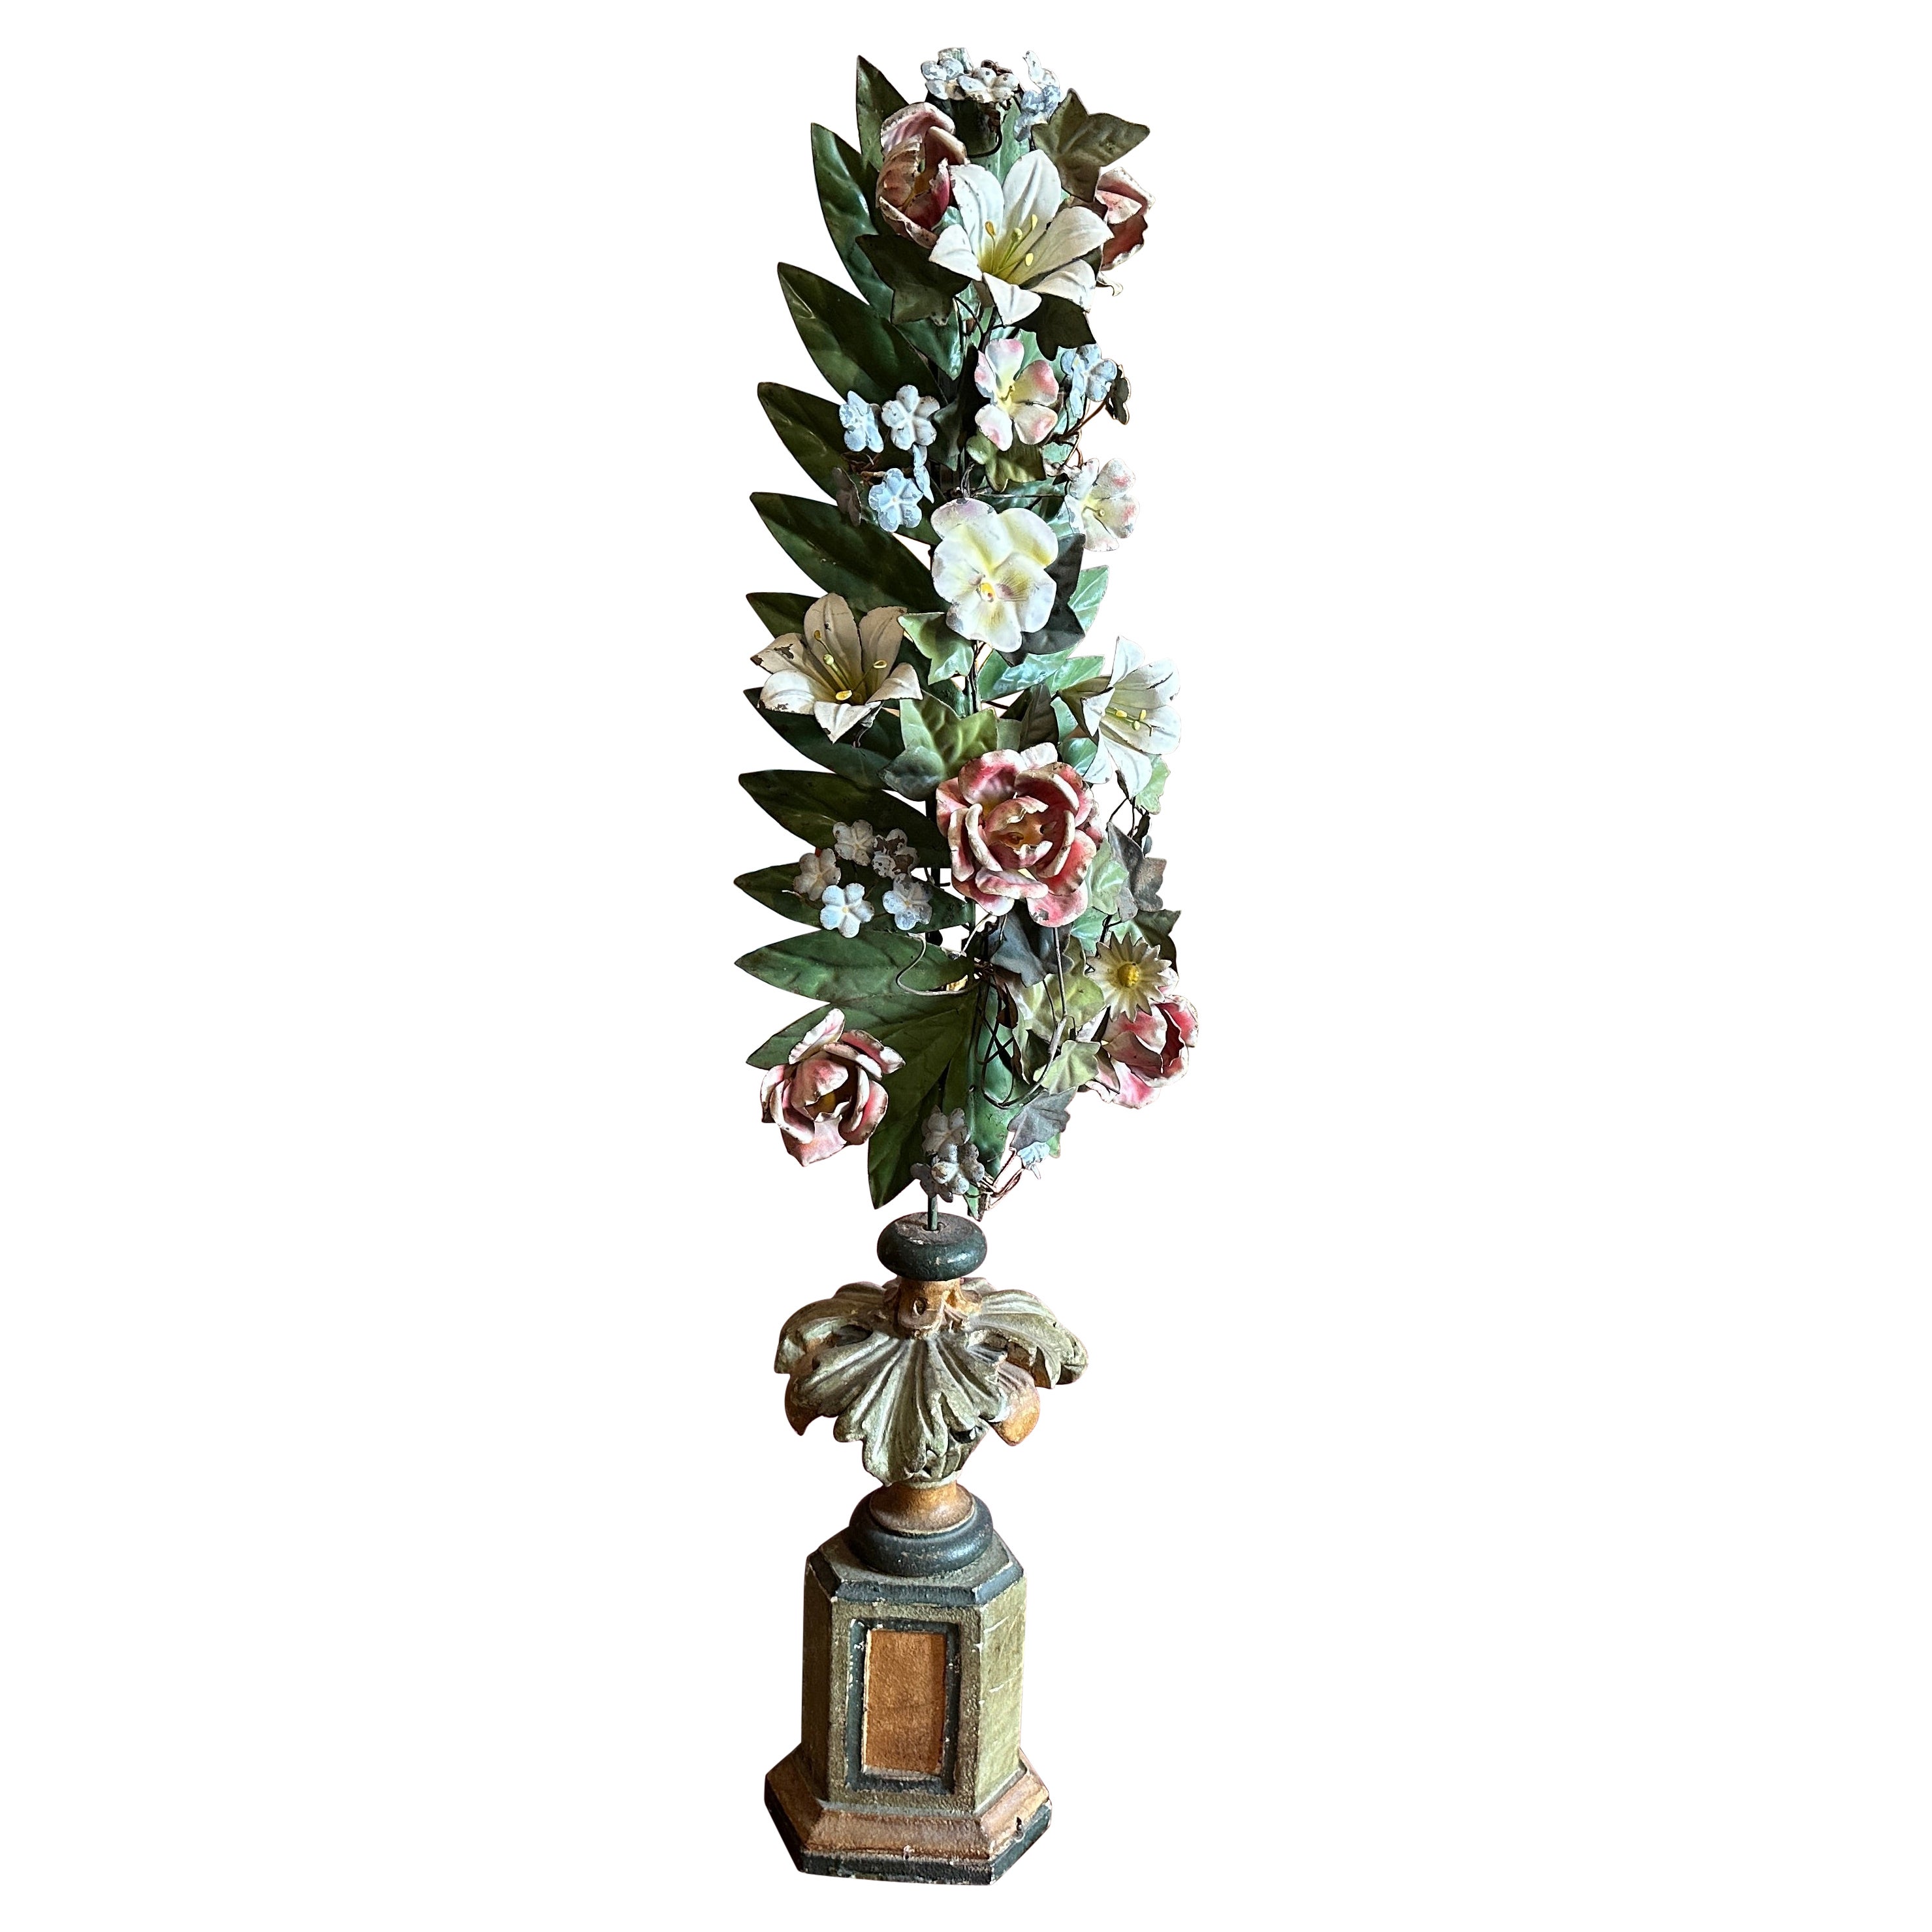 19th Century Lacquered Wood Palm Holder with Original Metal Floral Composition